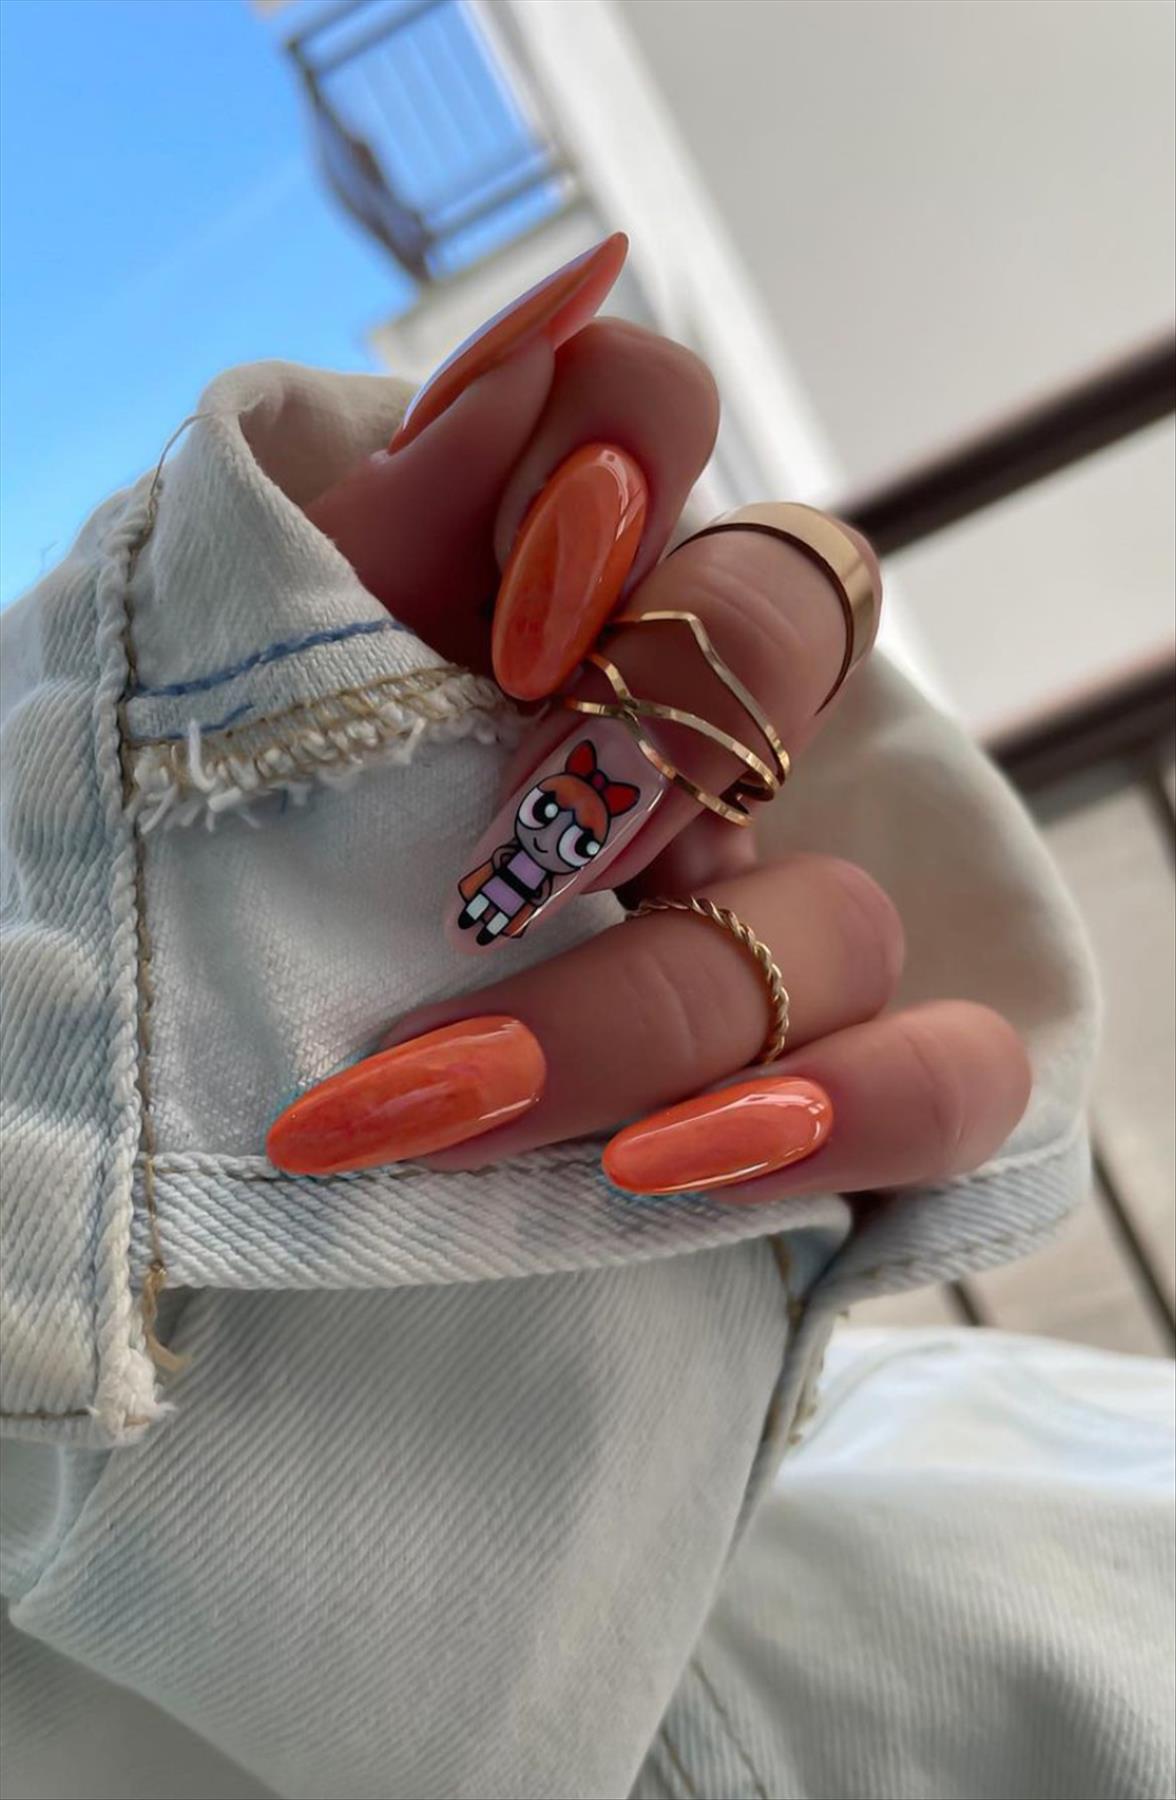 Pretty almond-shaped nail art to try now 